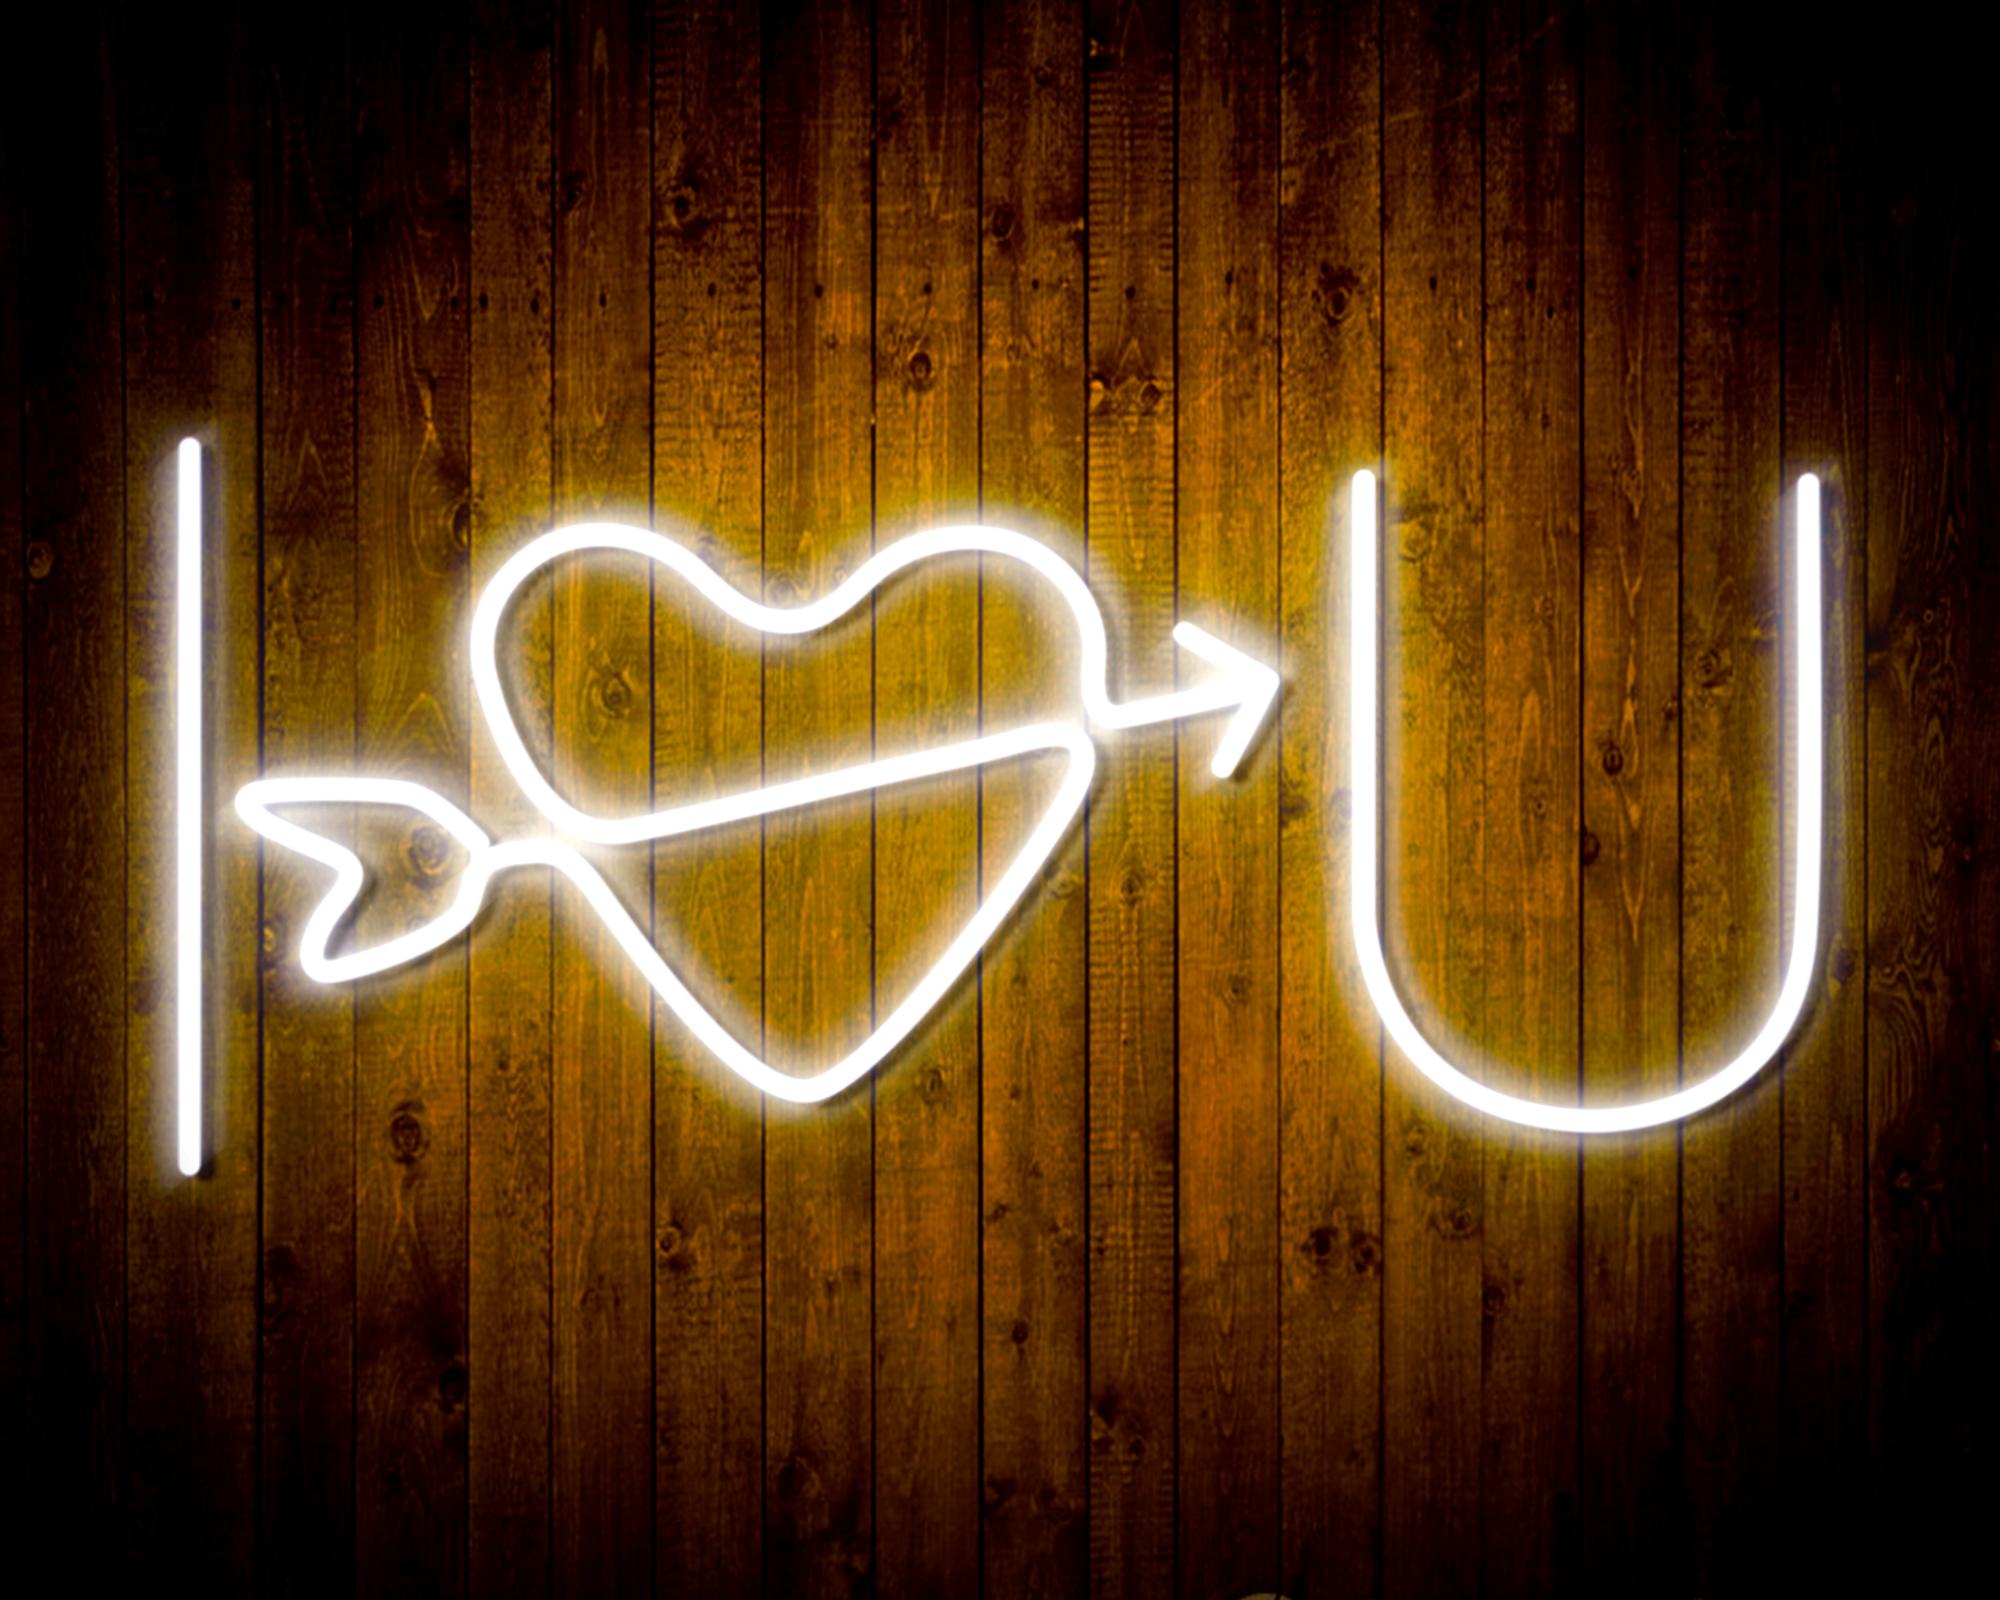 I Love You LED Neon Sign Wall Light